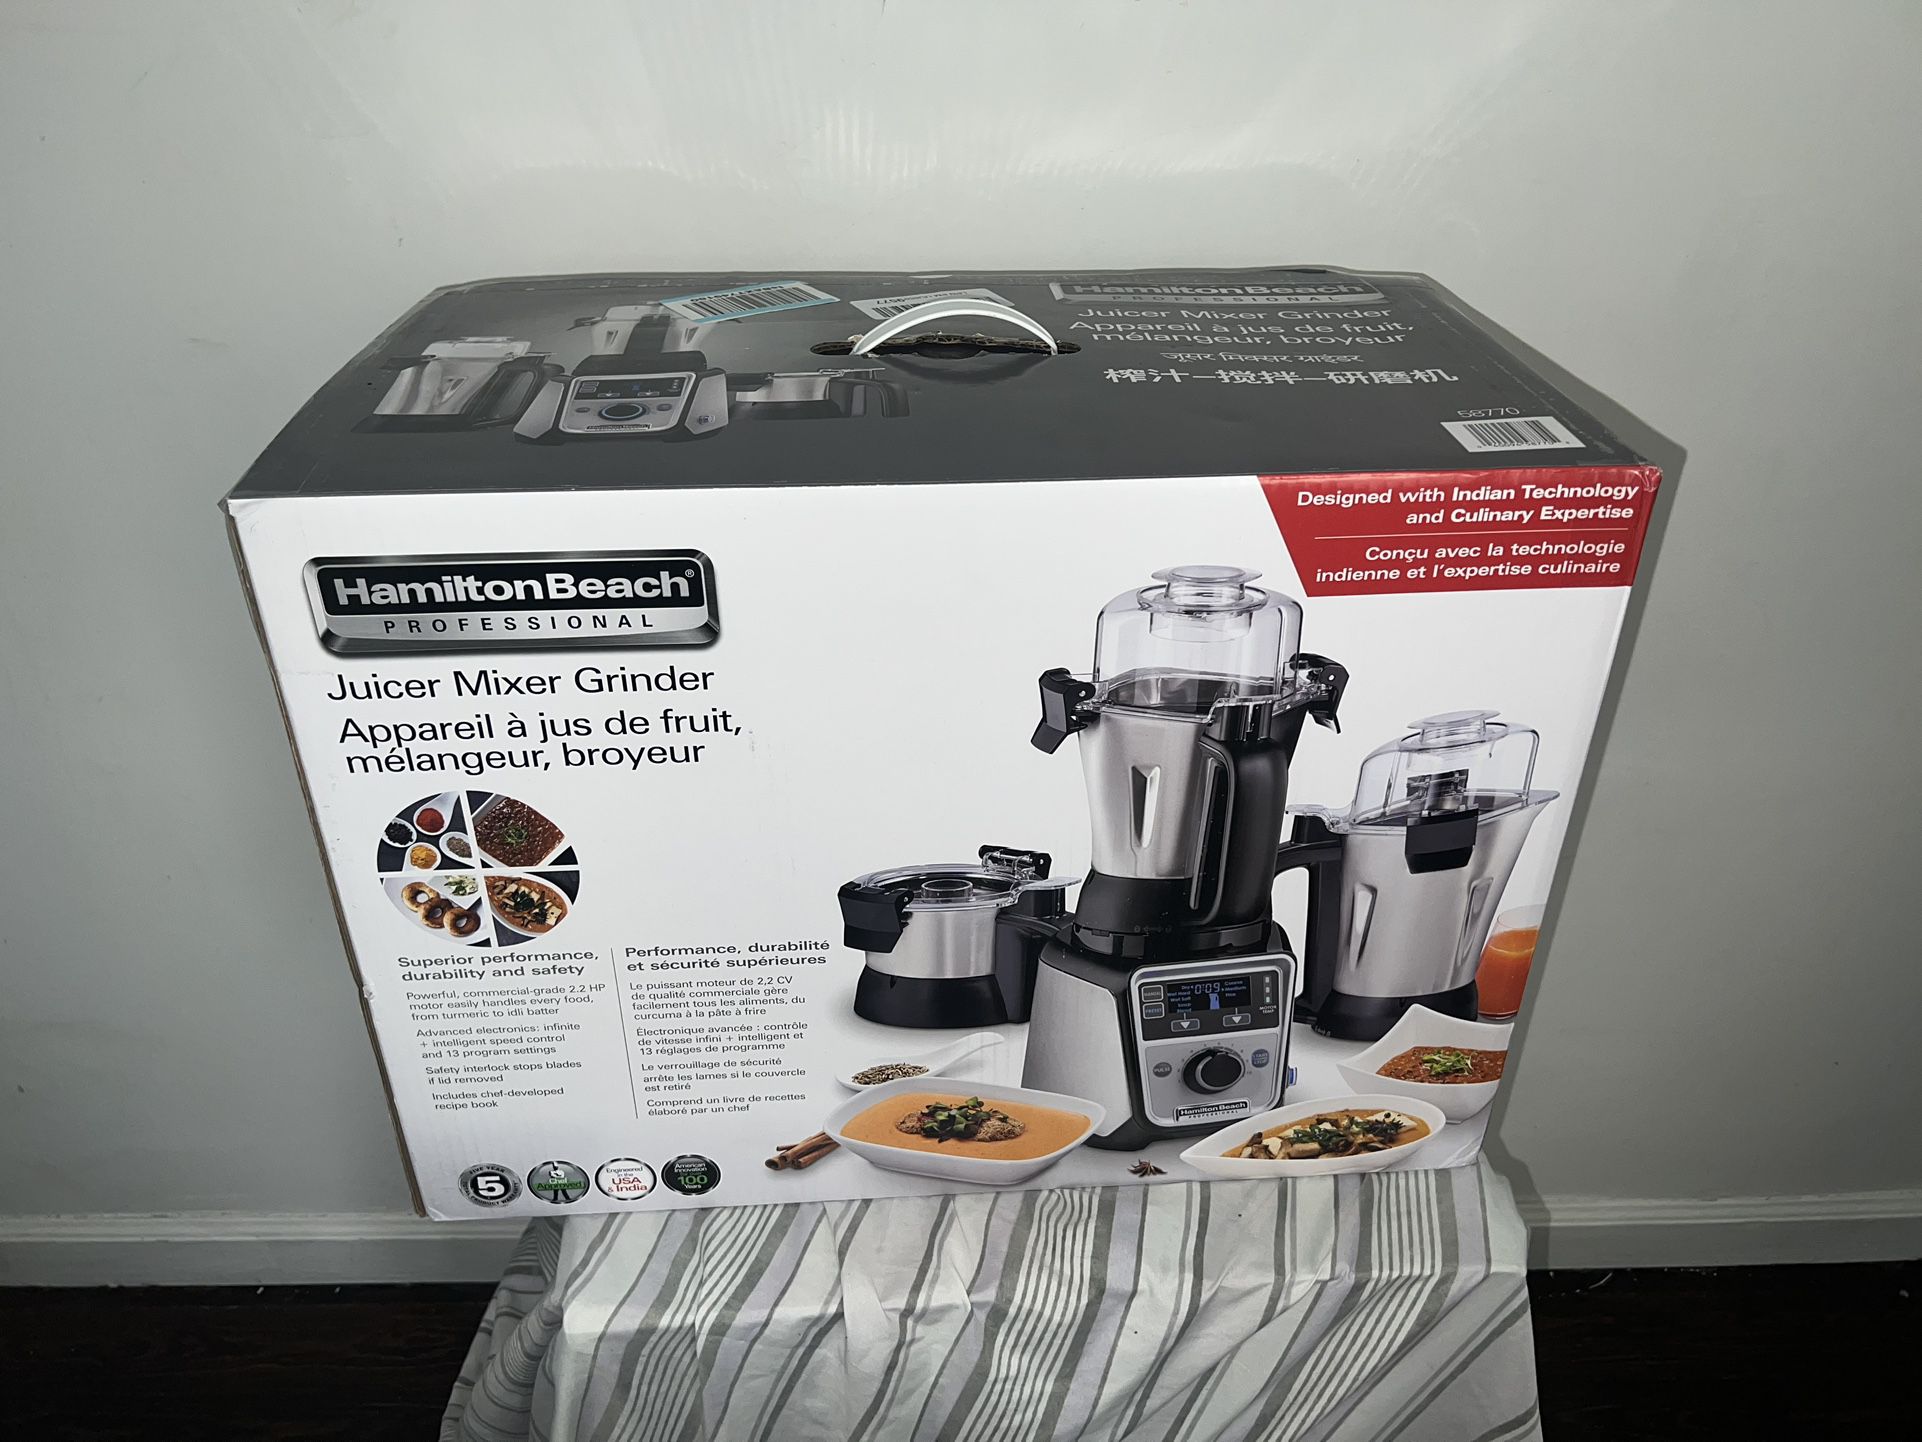 Hamilton Beach 3-in-1 Professional Juicer Mixer Grinder Review 